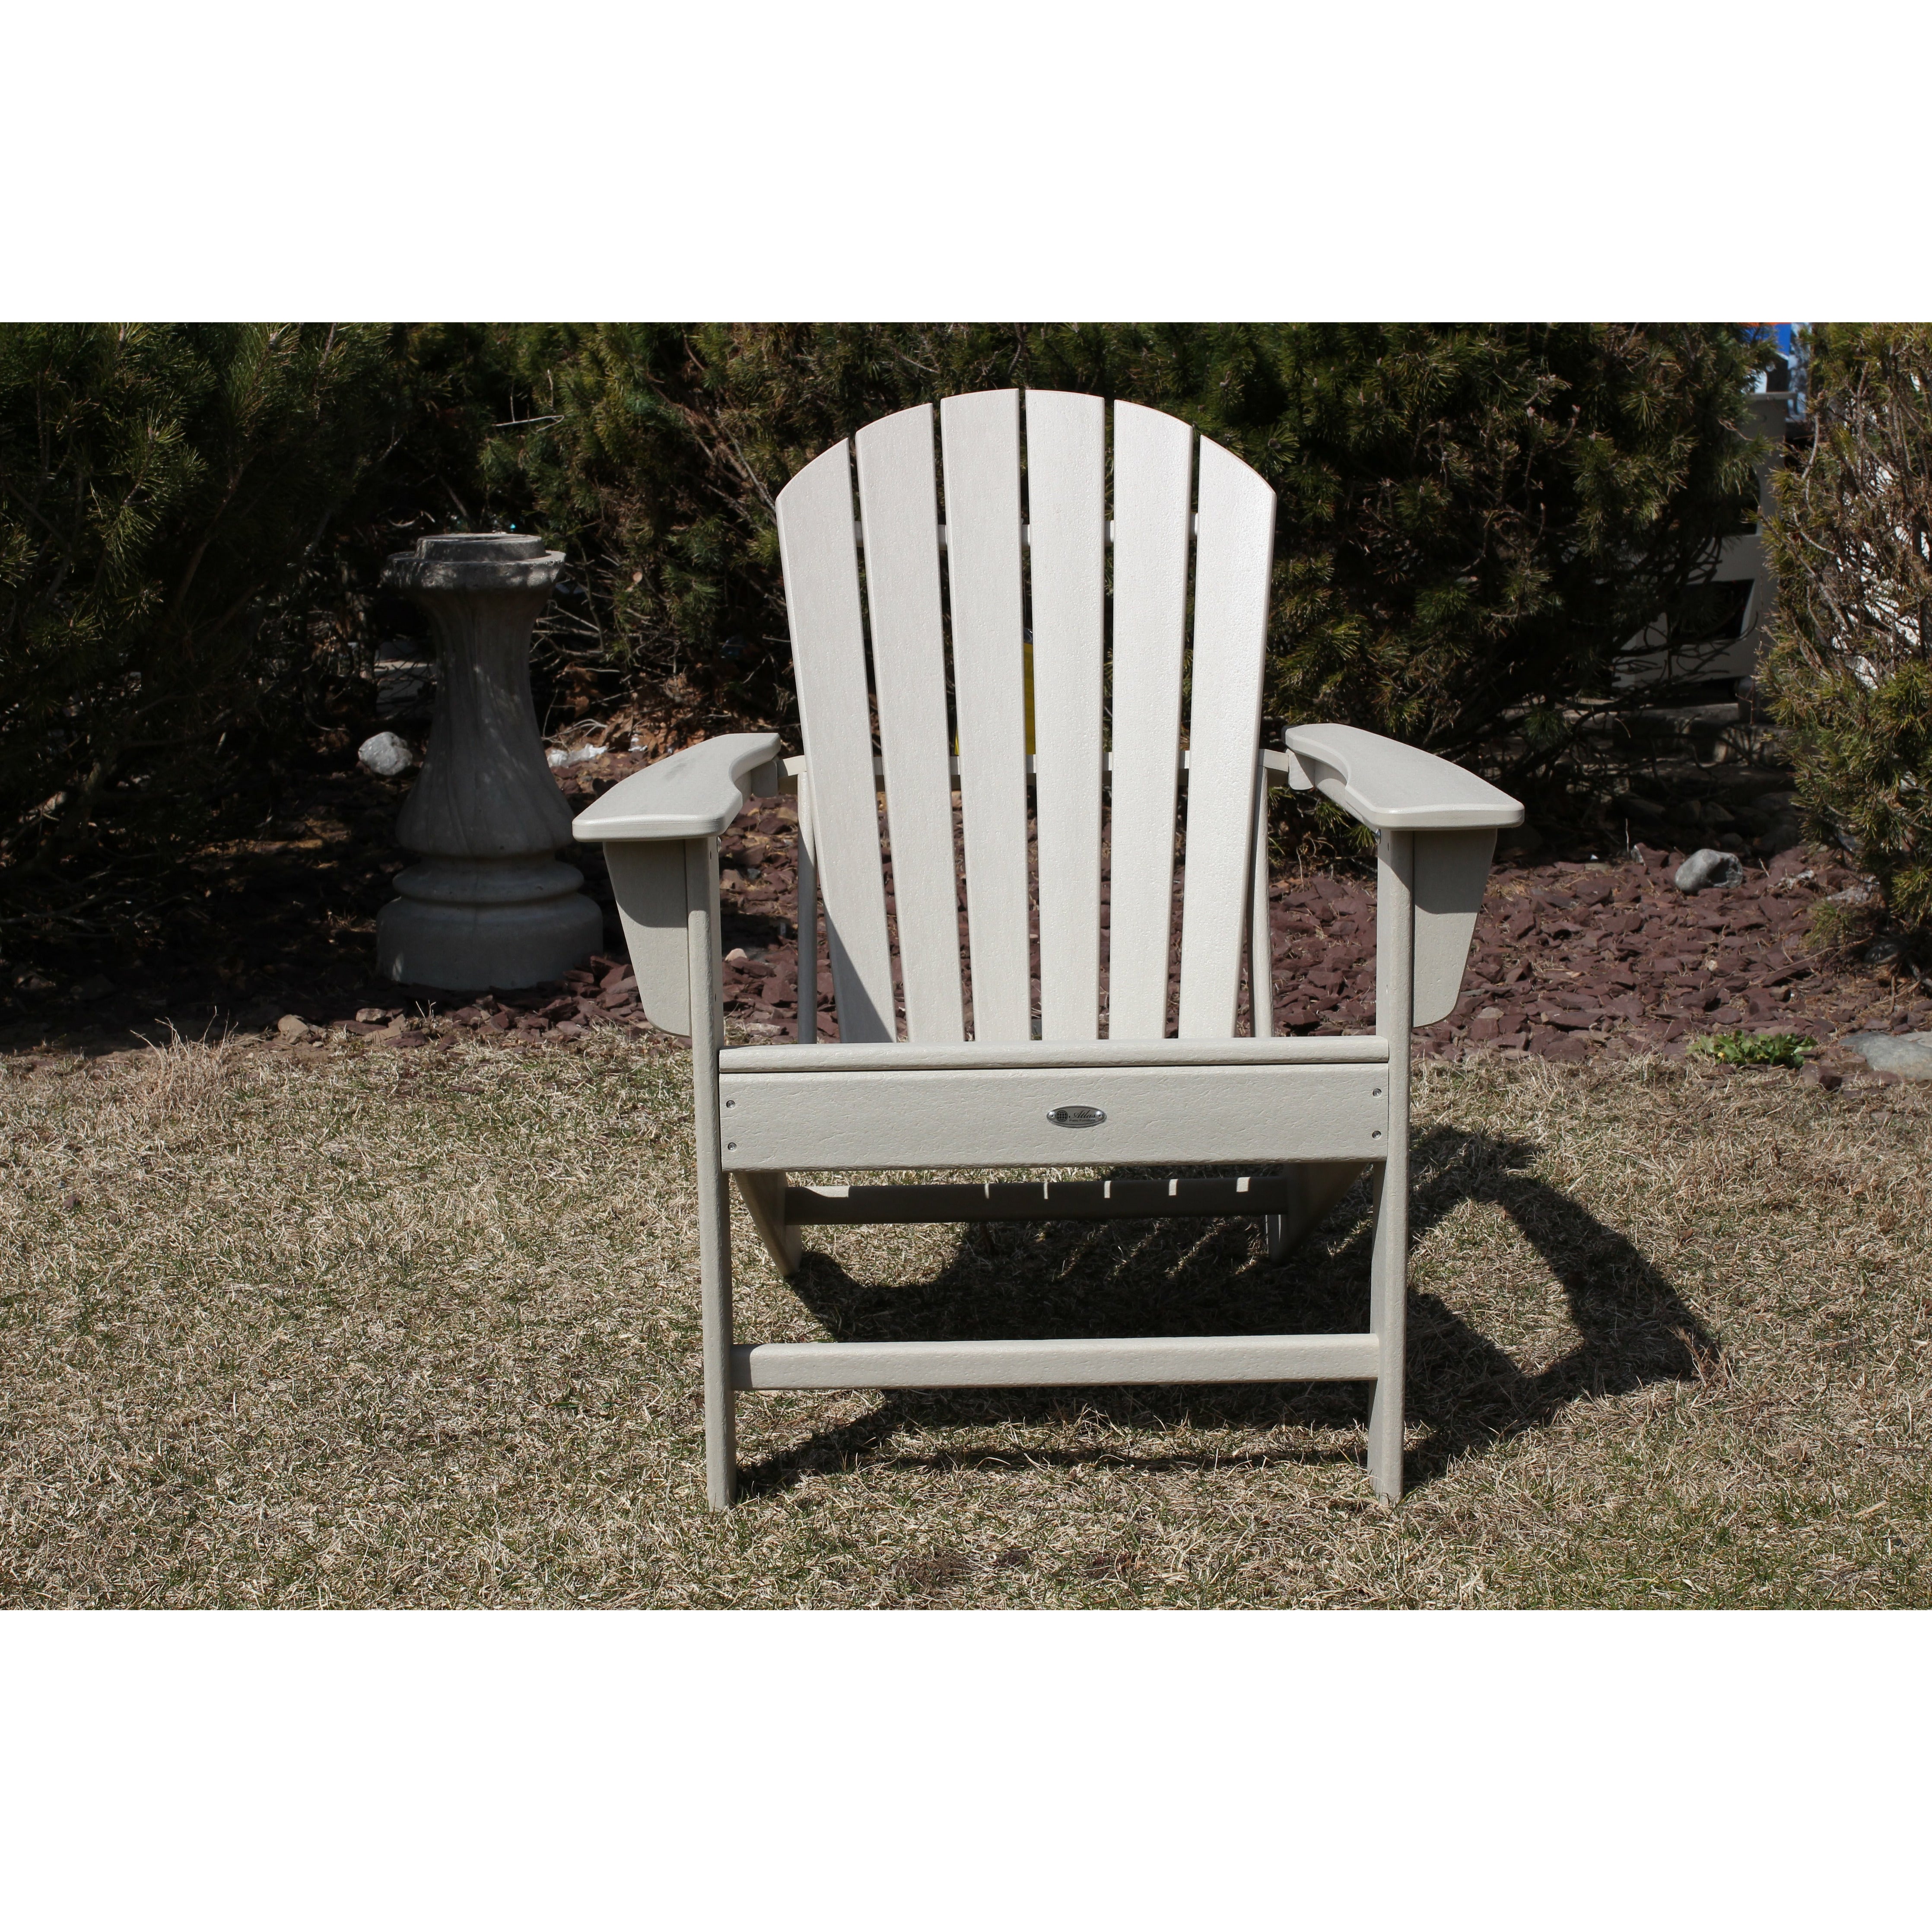 Surf City Adirondack Chair (Tan) - Polymer Furniture IN STOCK